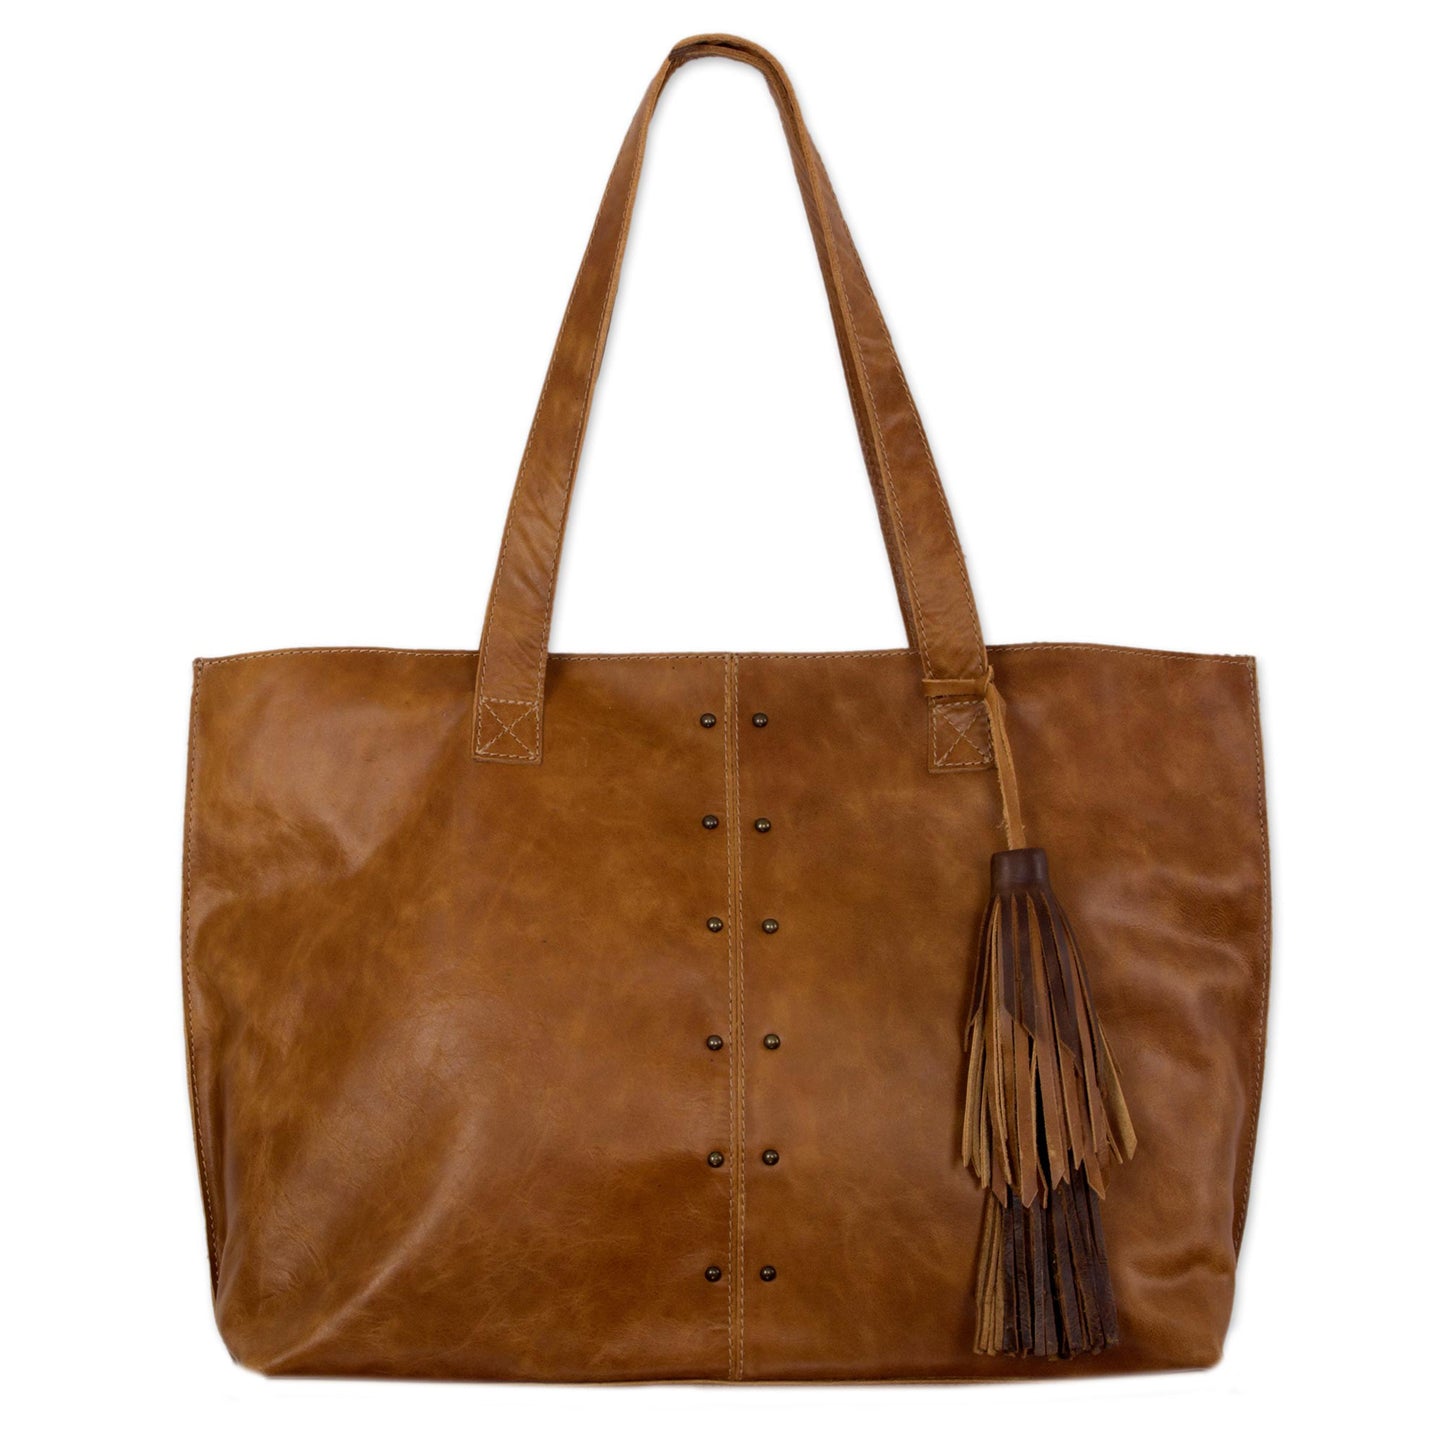 Capacious in Chestnut Brown Roomy Chestnut Brown Artisan Crafted Leather Shoulder Bag